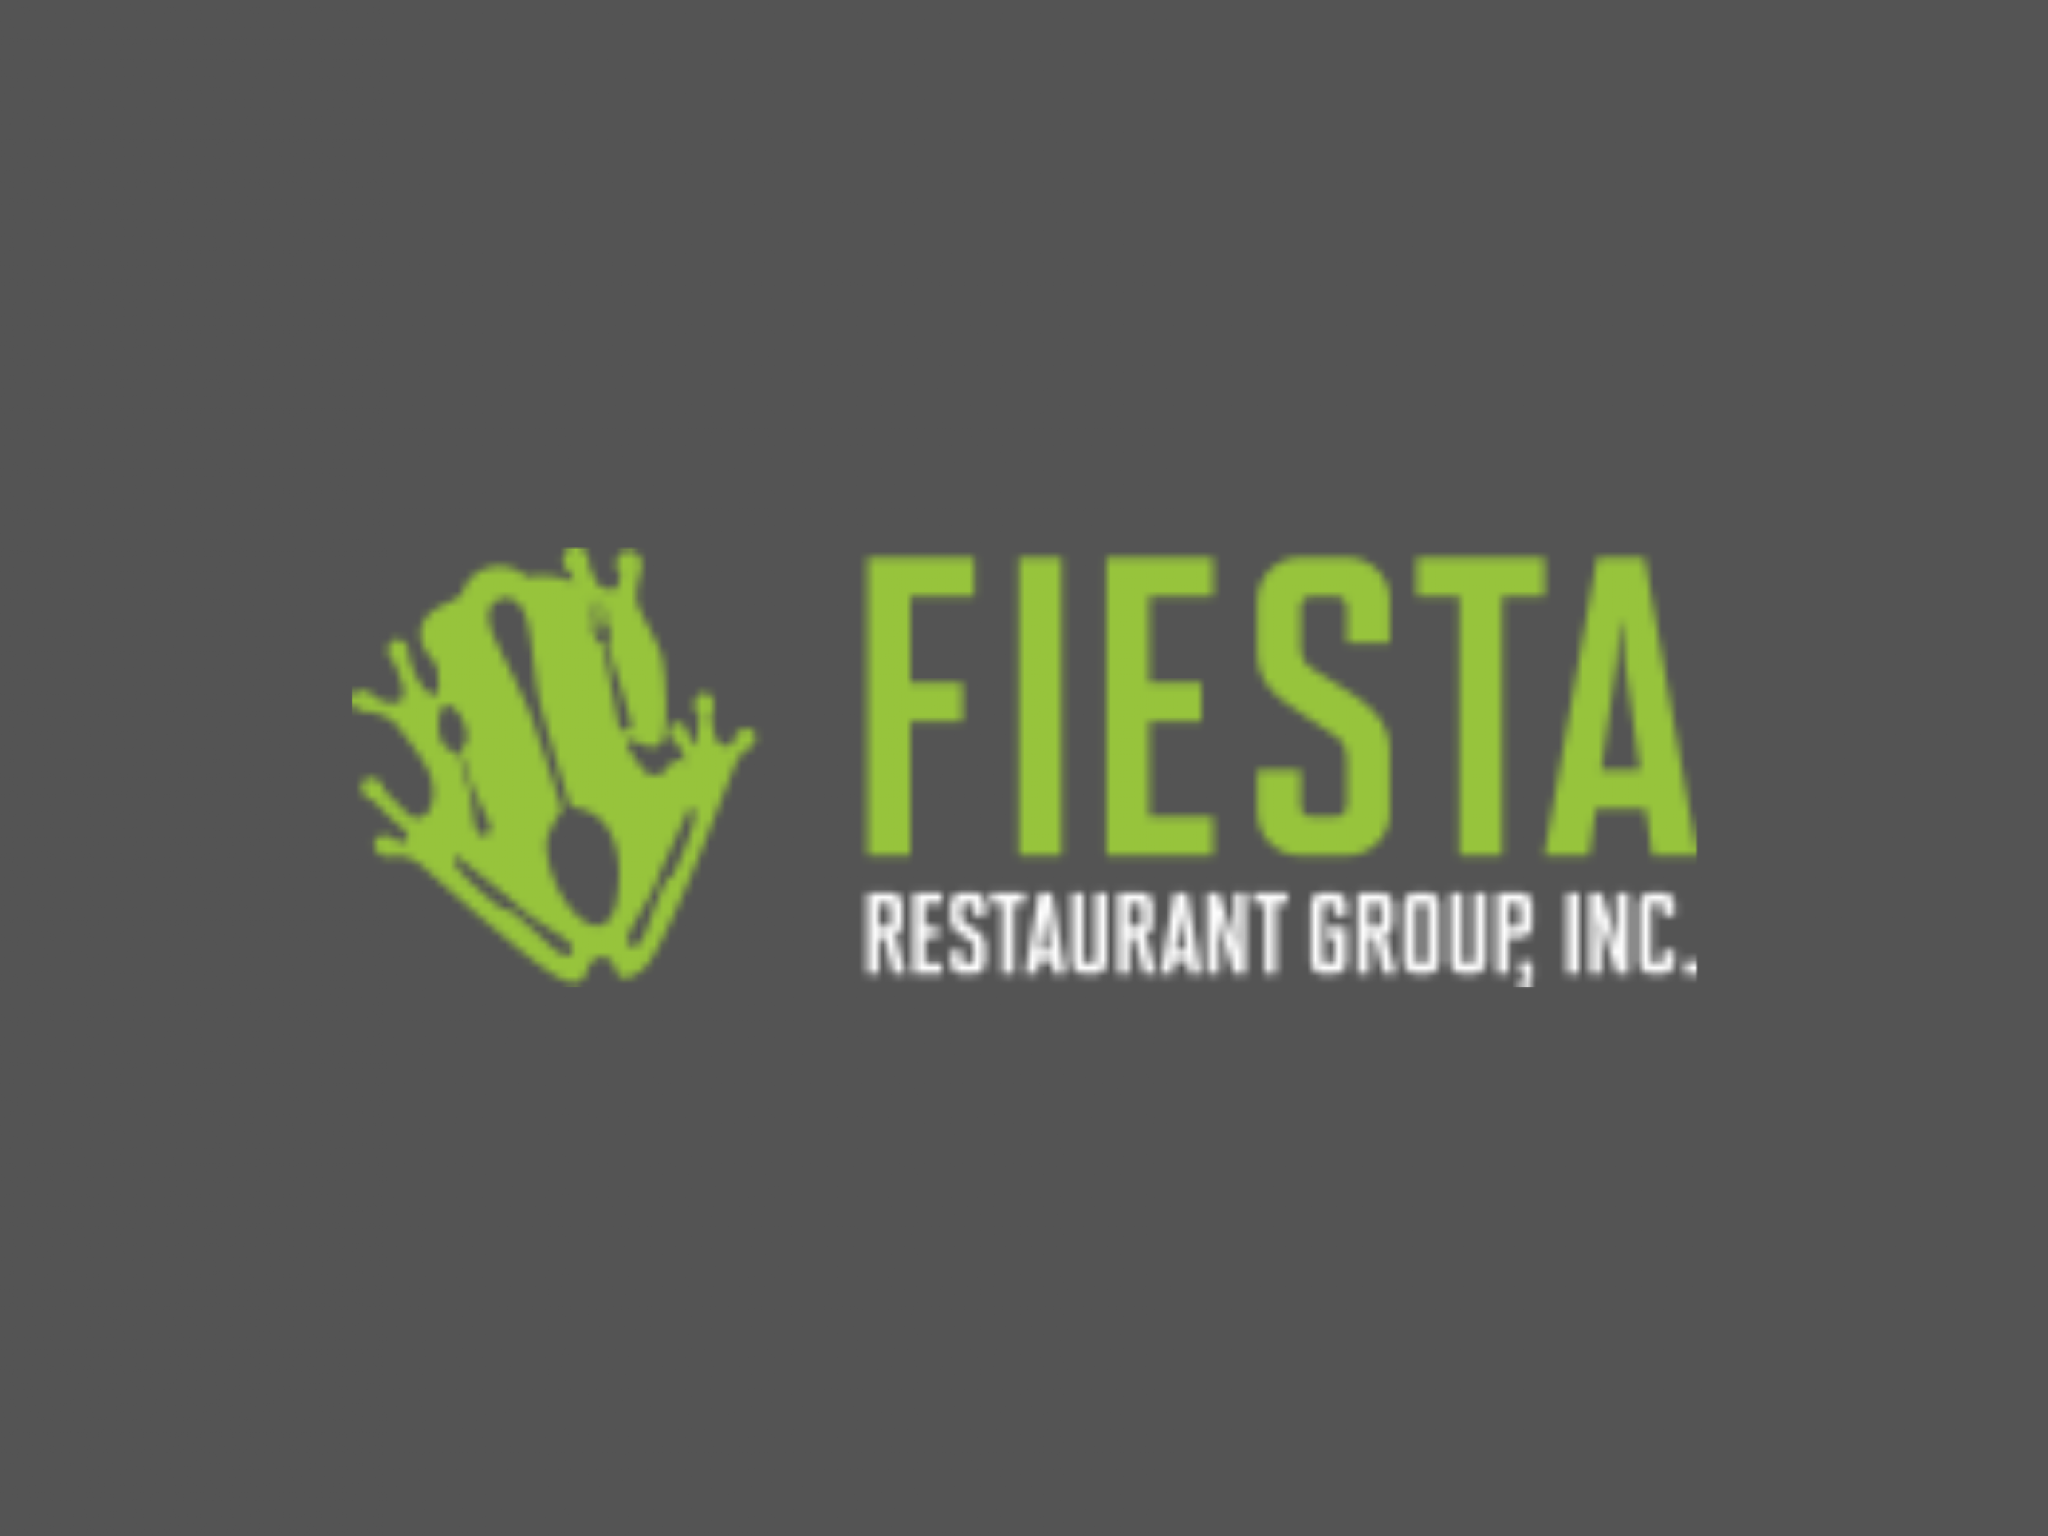  fiesta-restaurant-to-be-acquired-by-authentic-restaurant-brands-for-225m-report 